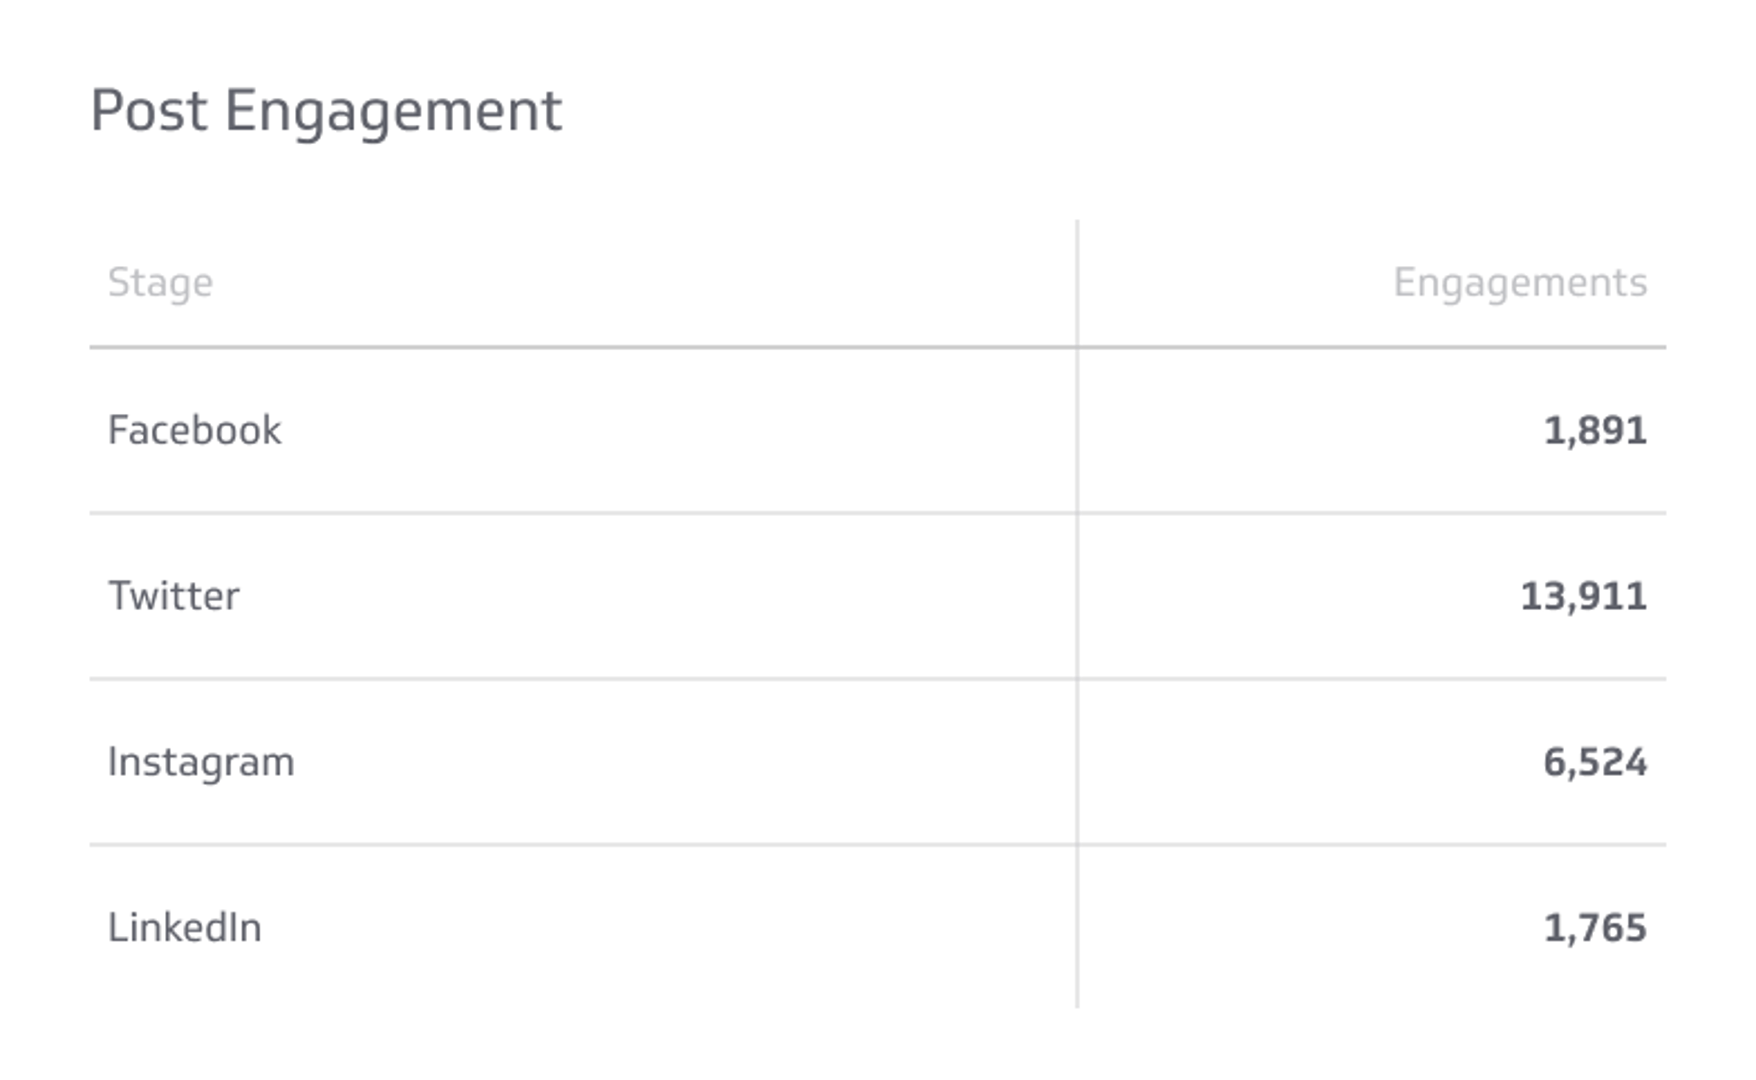 Related KPI Examples - Post Engagement Metric